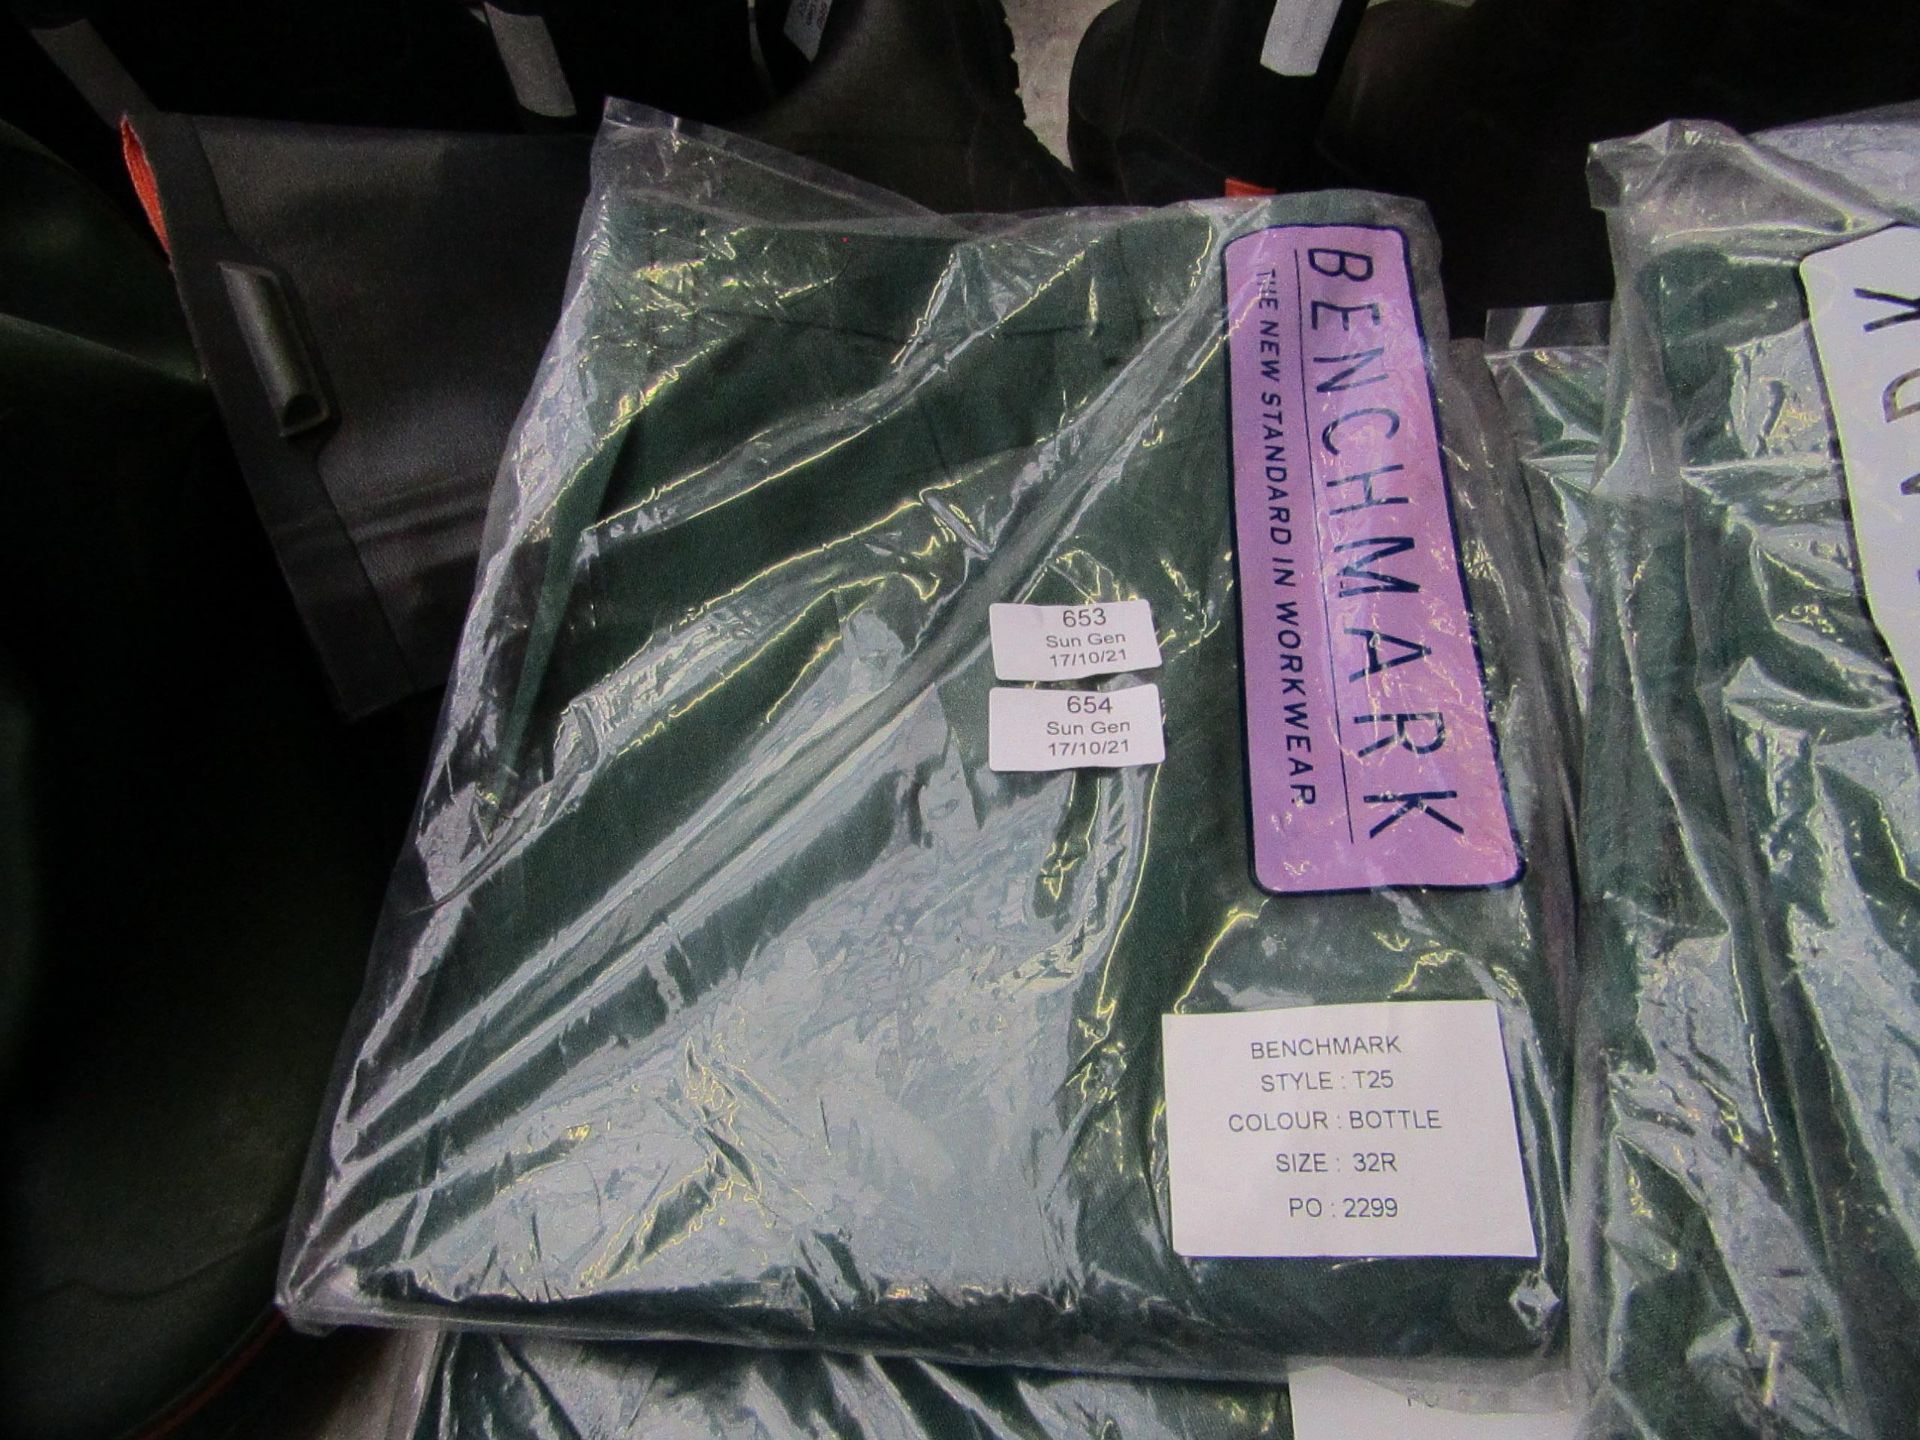 1x benchmark size 32 green work pants - new & packaged.